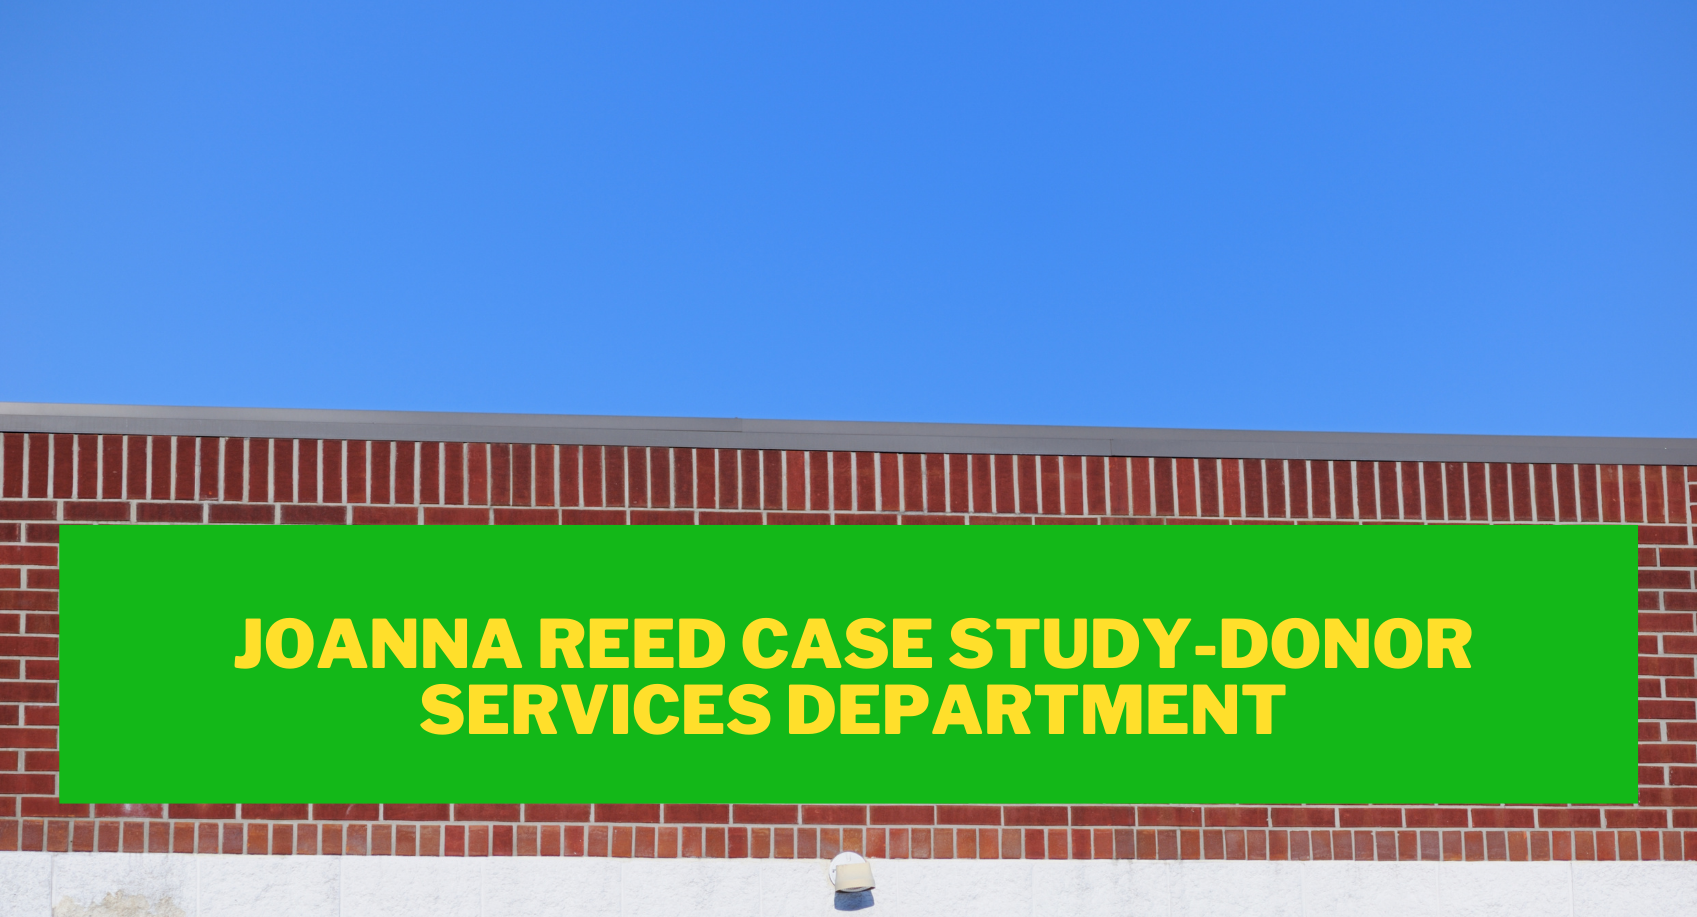 Joanna Reed Case Study-Donor Services Department